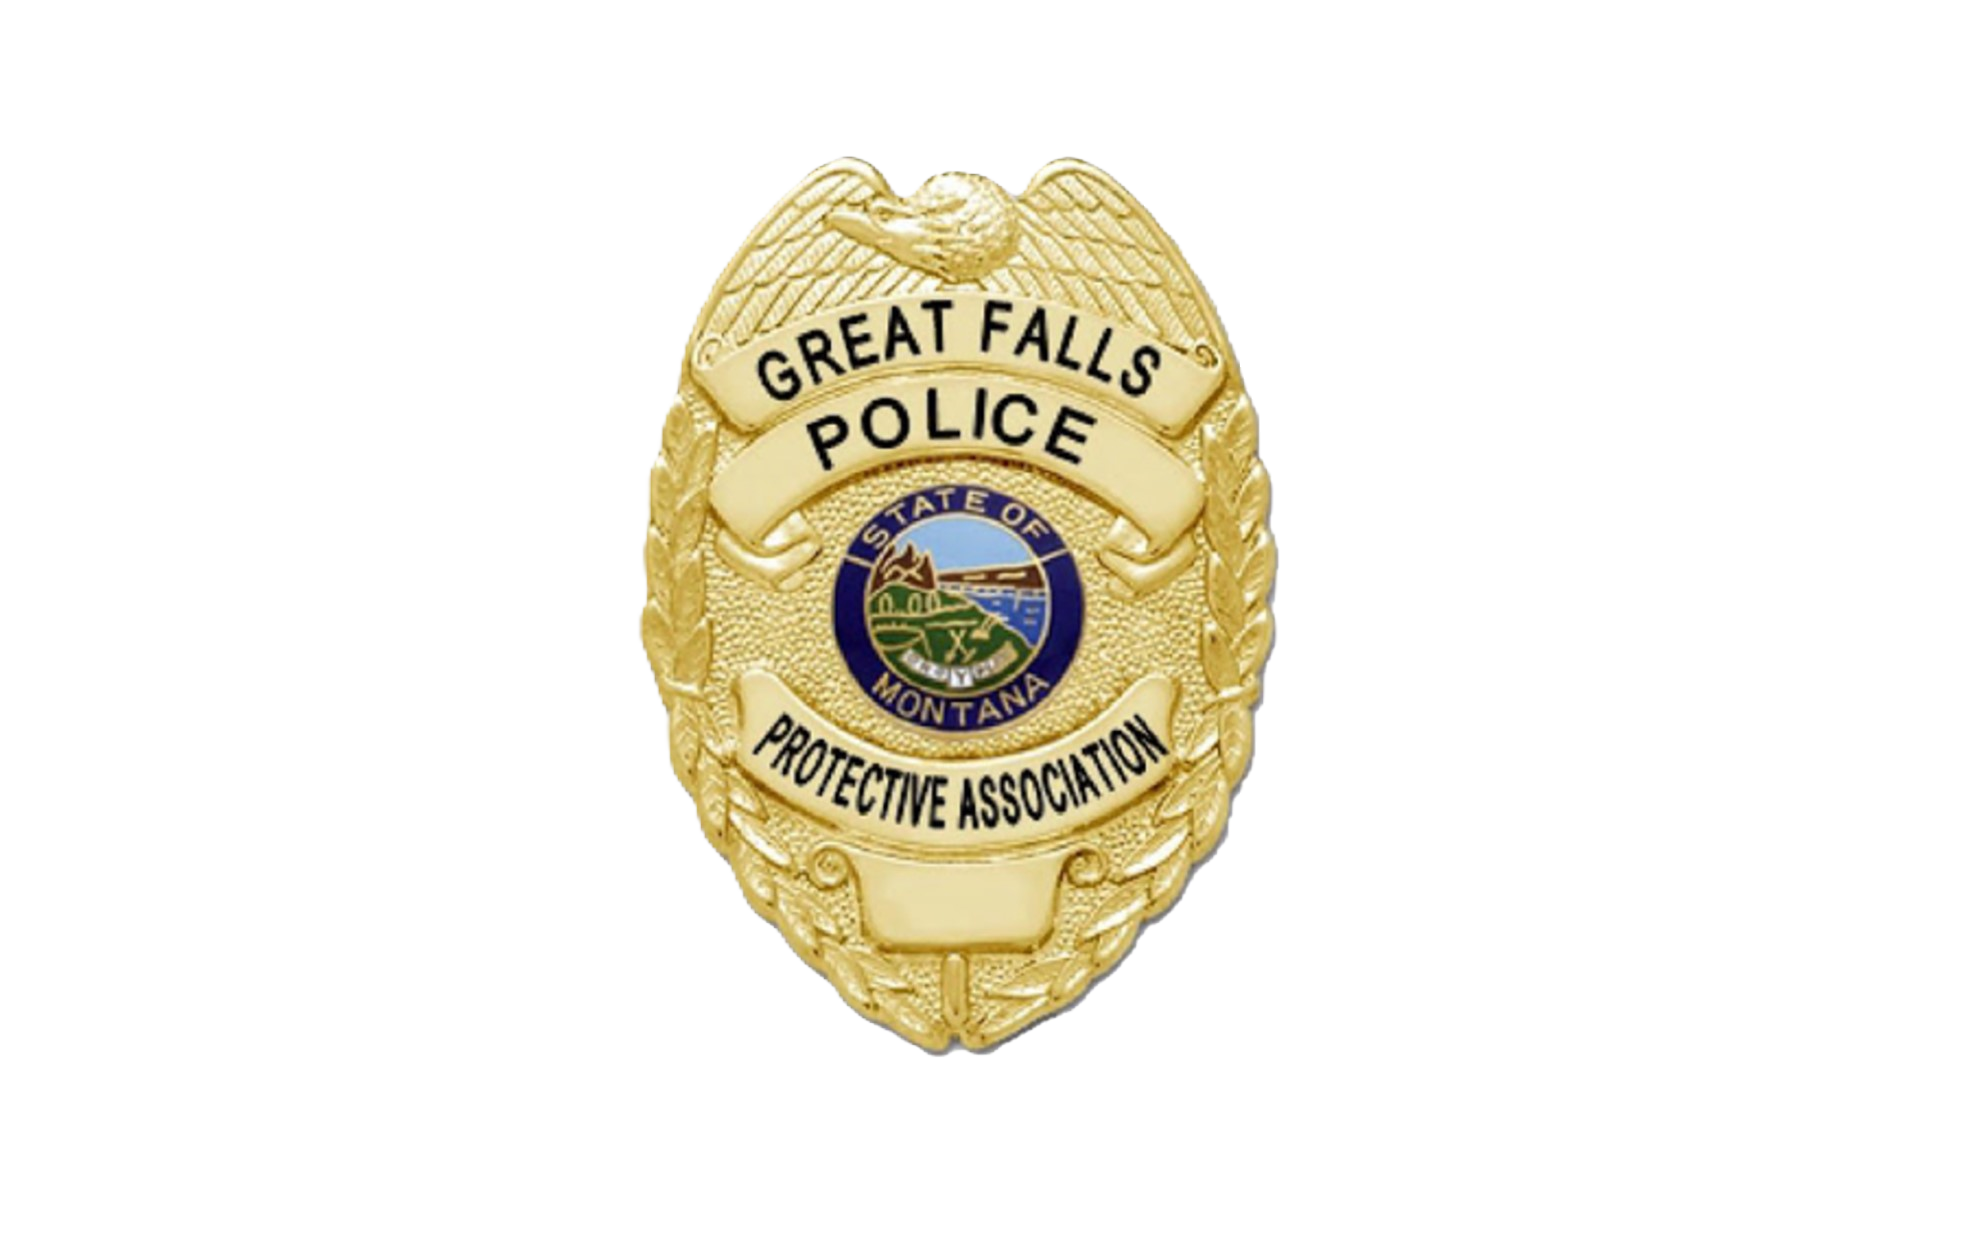 Great Falls Police Protective Assc.